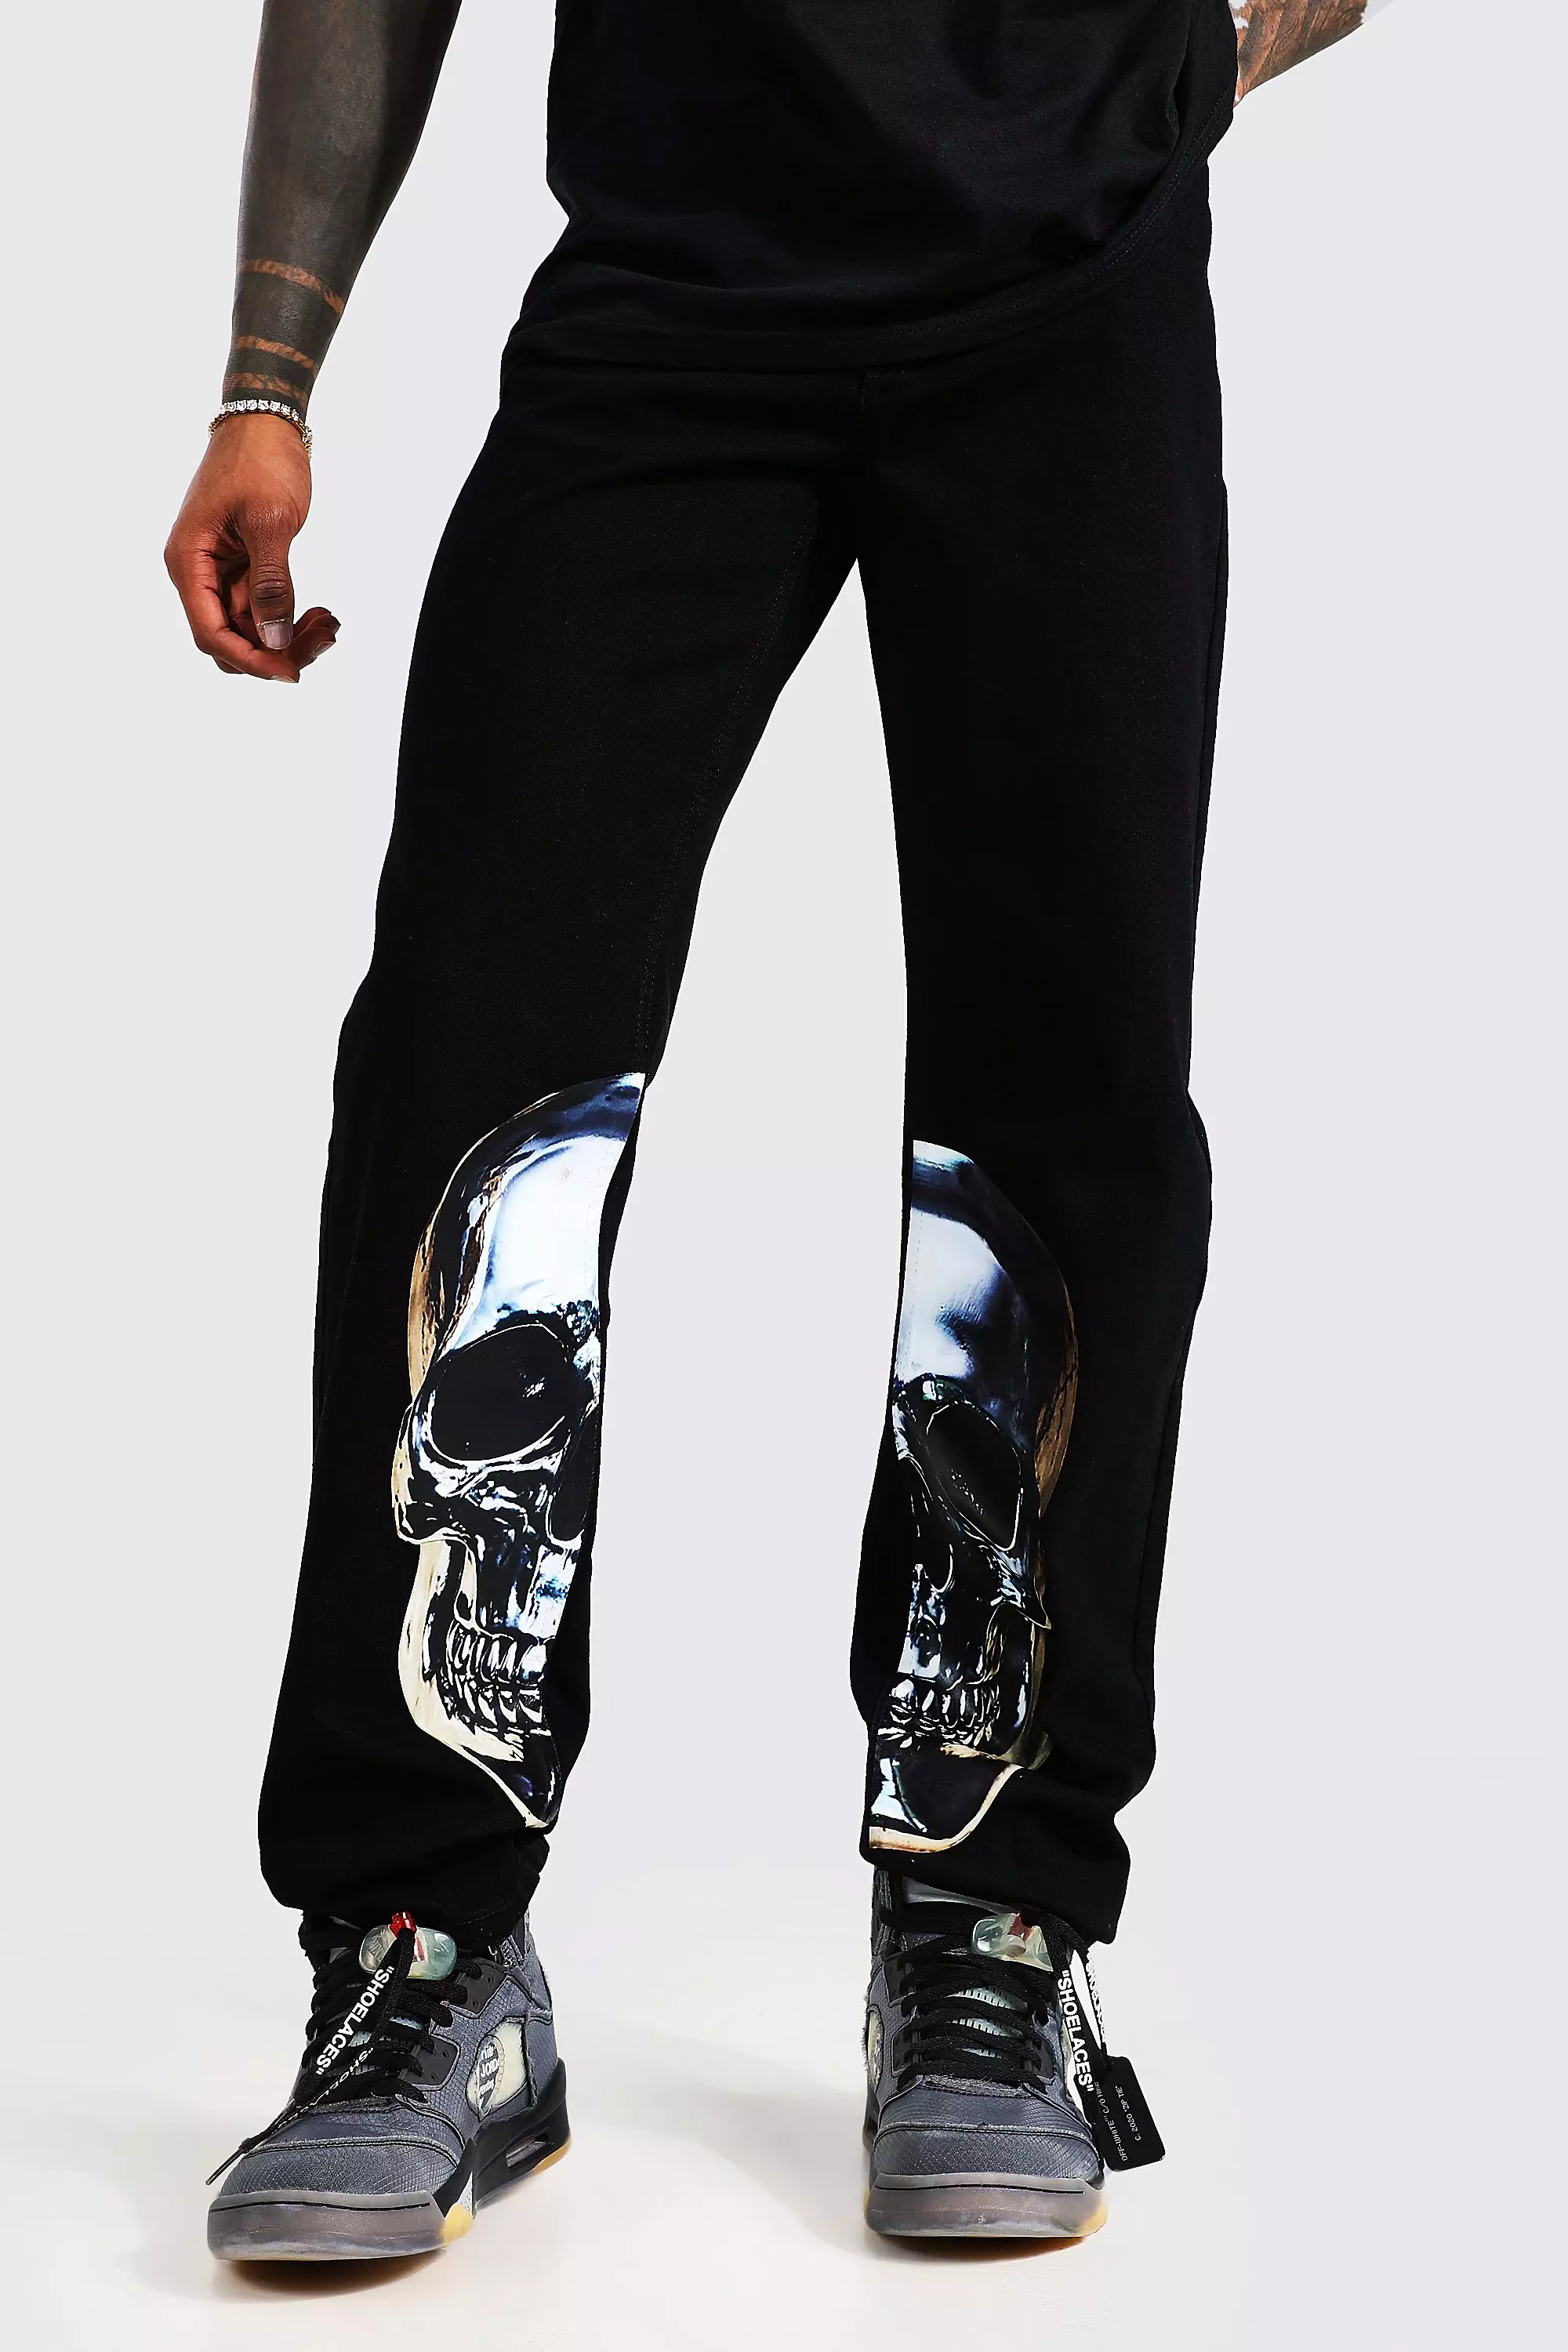 Relaxed Fit Rigid Skull Graphic Print Jeans | boohooMAN USA